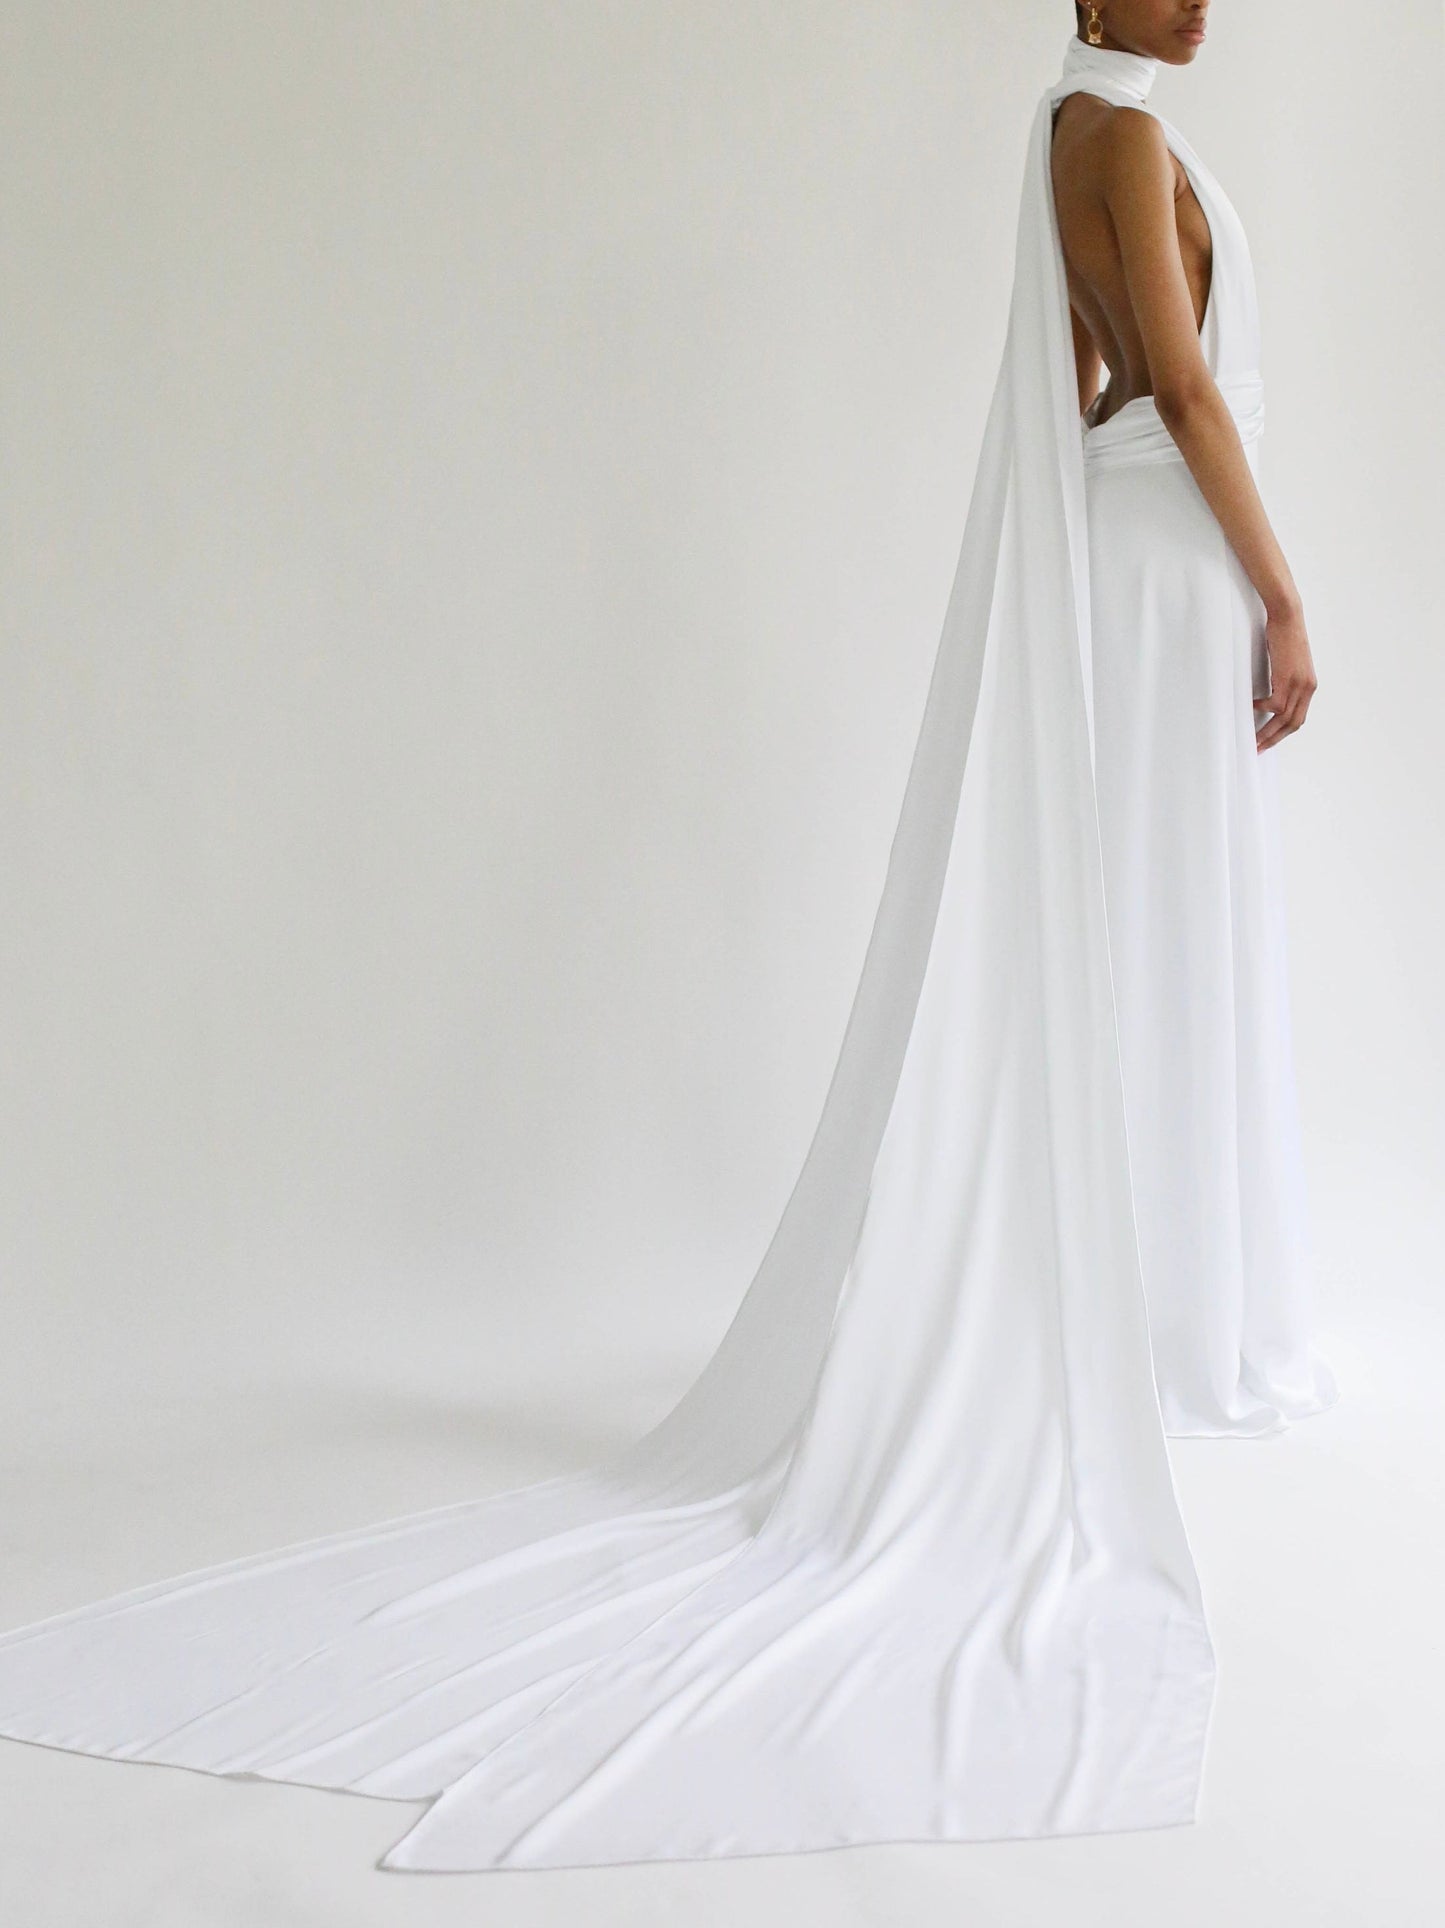 A view of the back of the 'Danielle' wedding dress